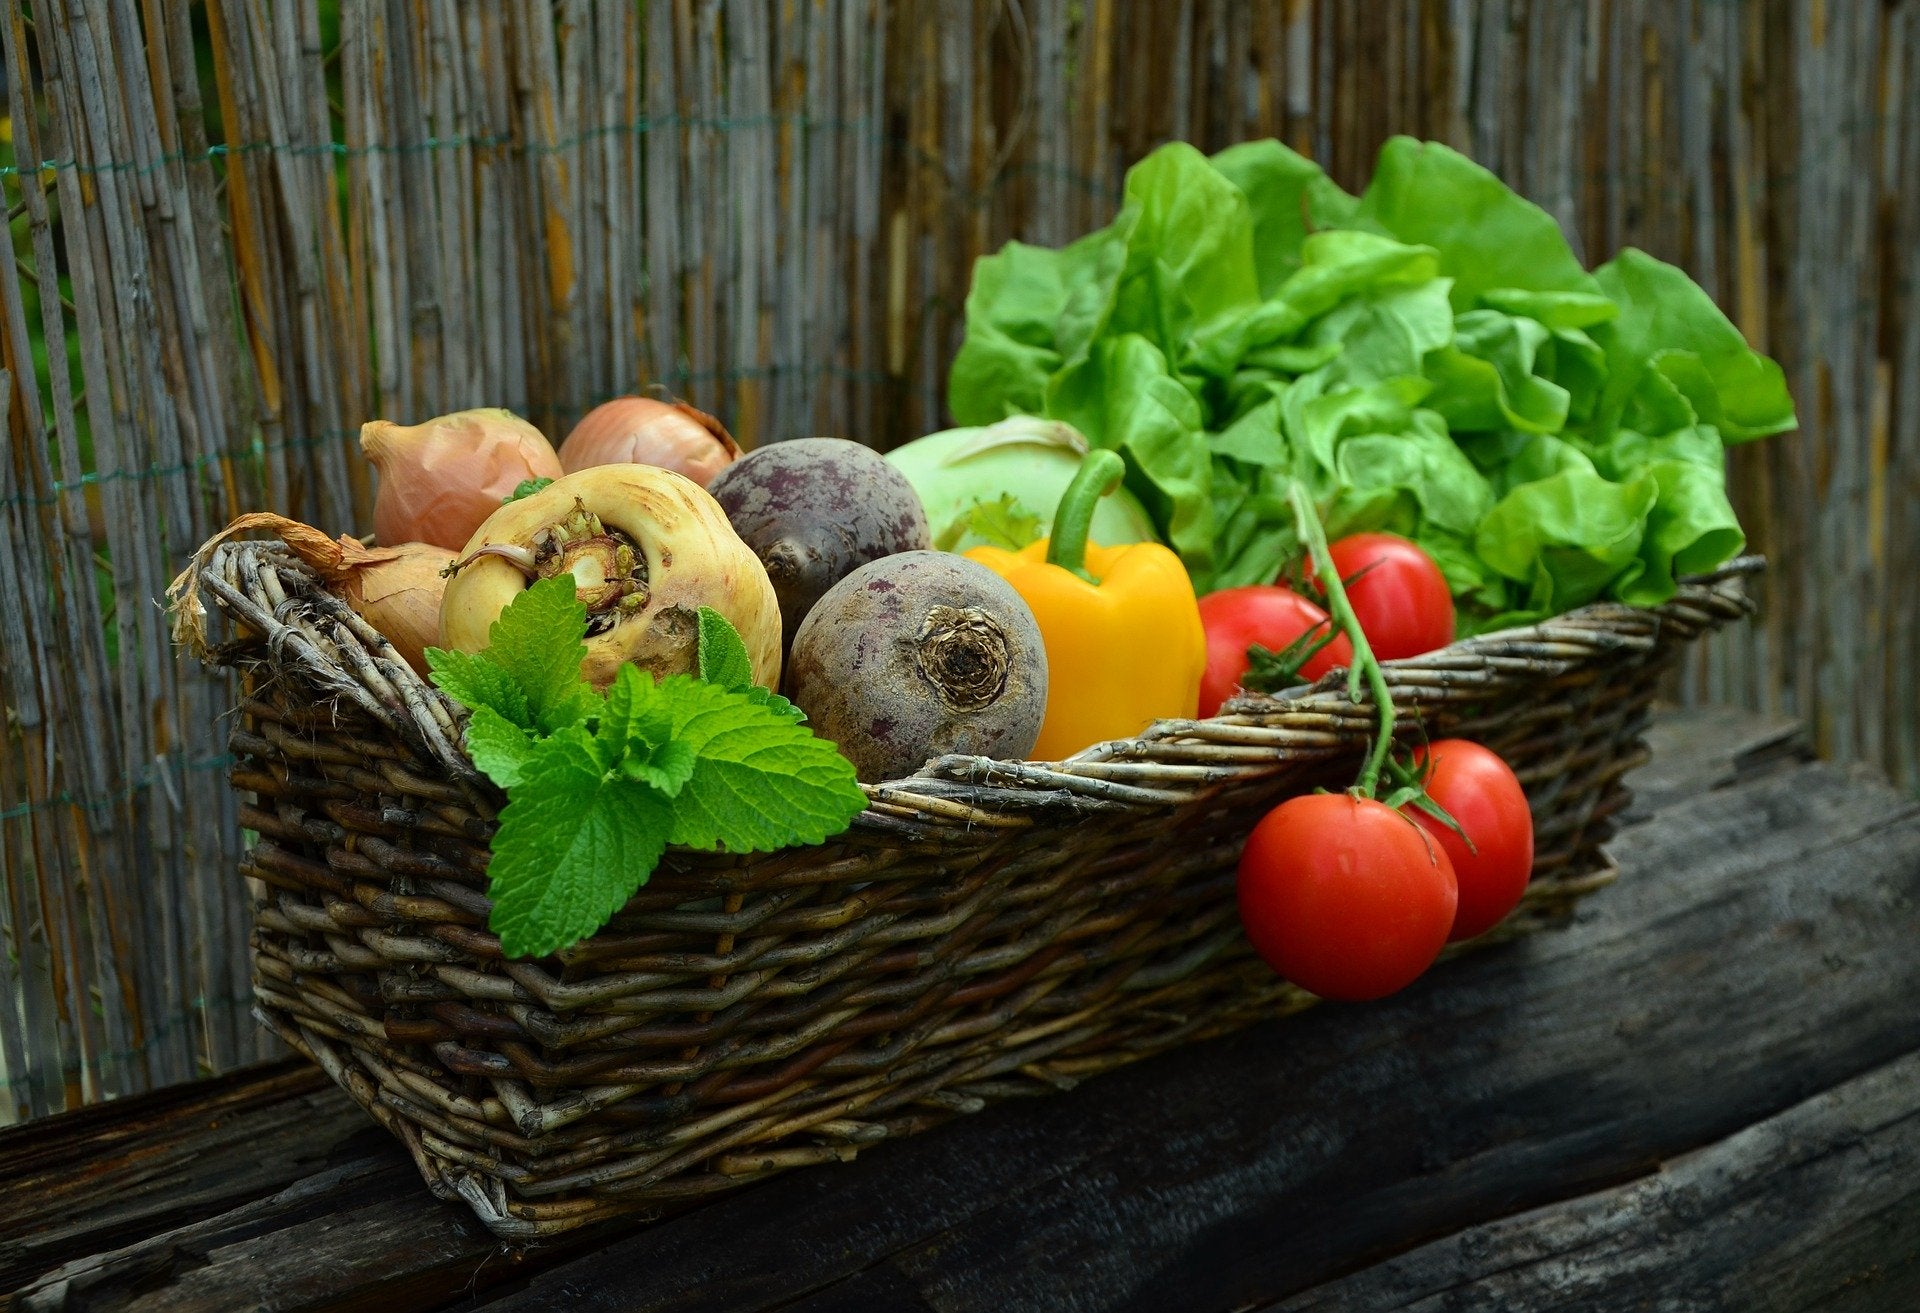 3 Easy Ways to Extend Your Vegetable Growing Season